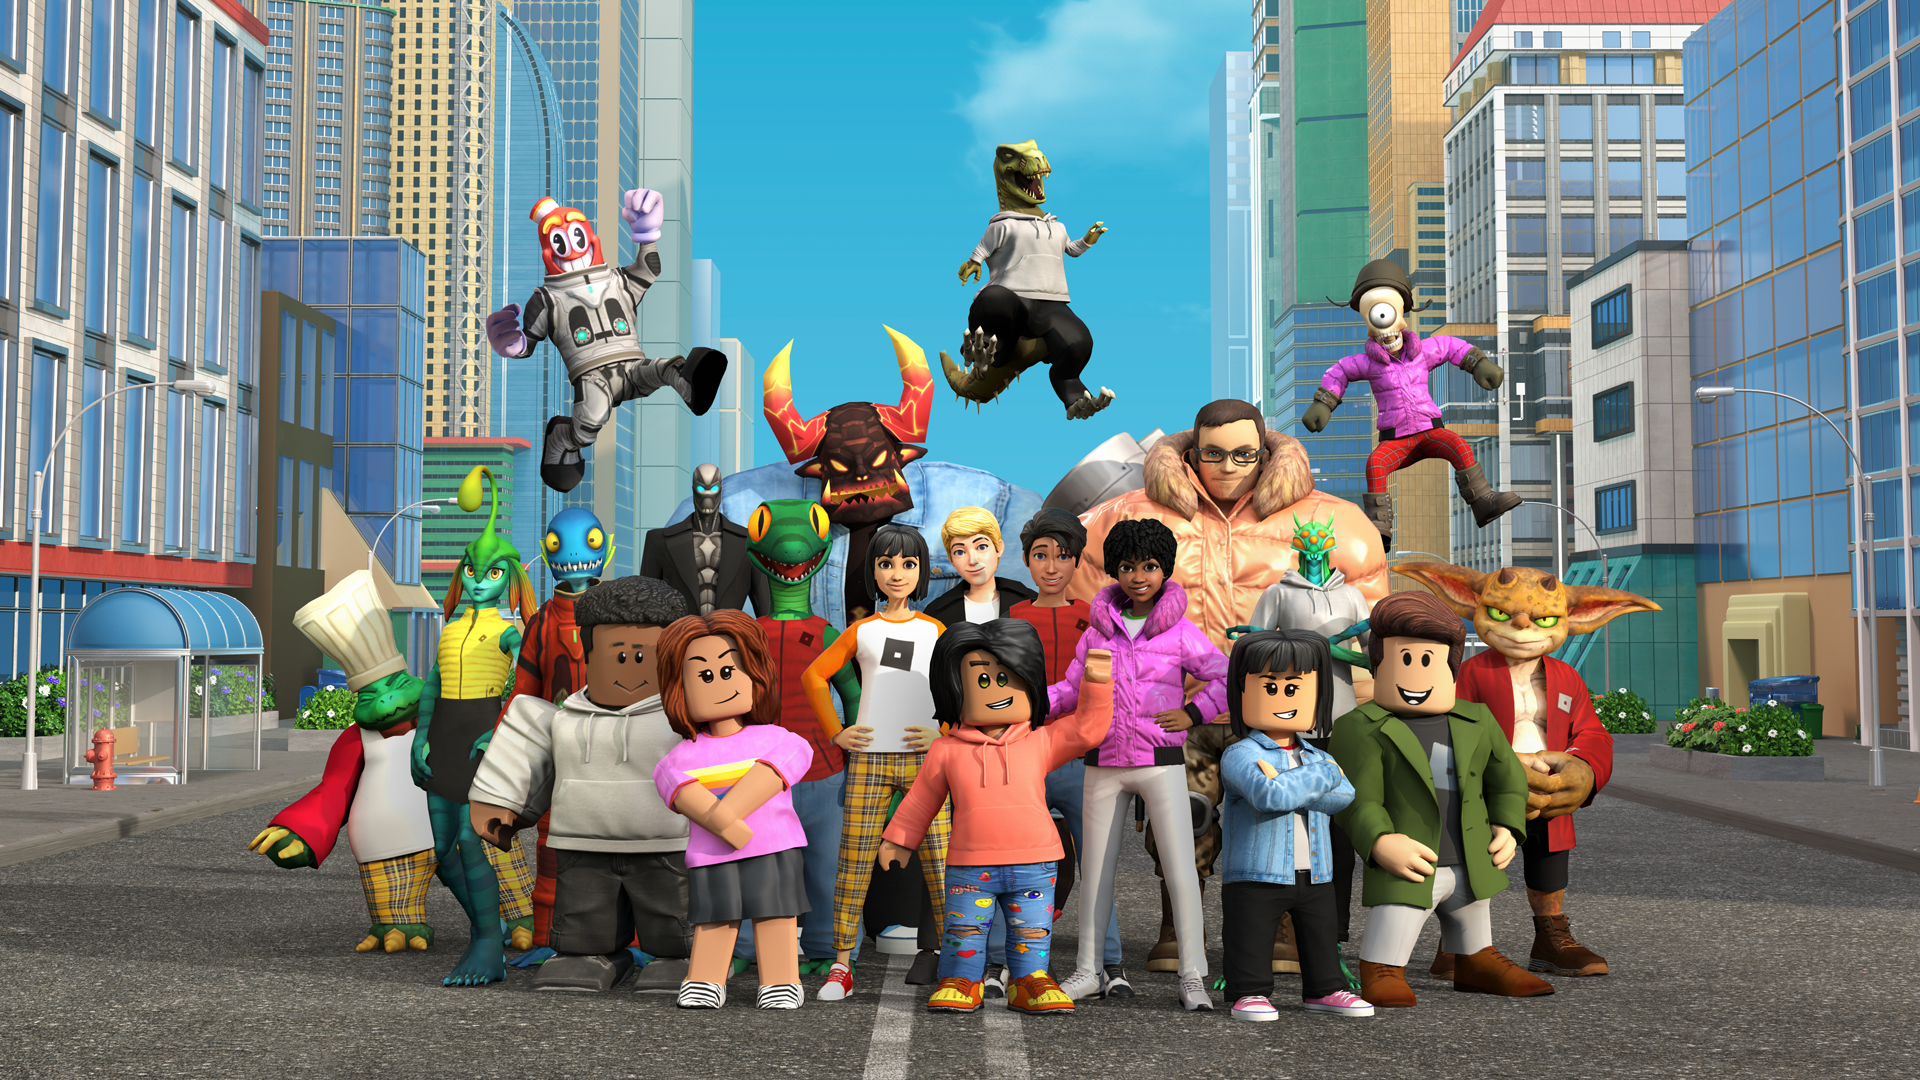 Many different Roblox-created characters are happily standing on a city street, with blue skies in the background and large buildings on either side. In addition to cartoony humanoids of all shapes and sizes, there is a robot, a dinosaur in a hoodie, and more colorful characters.